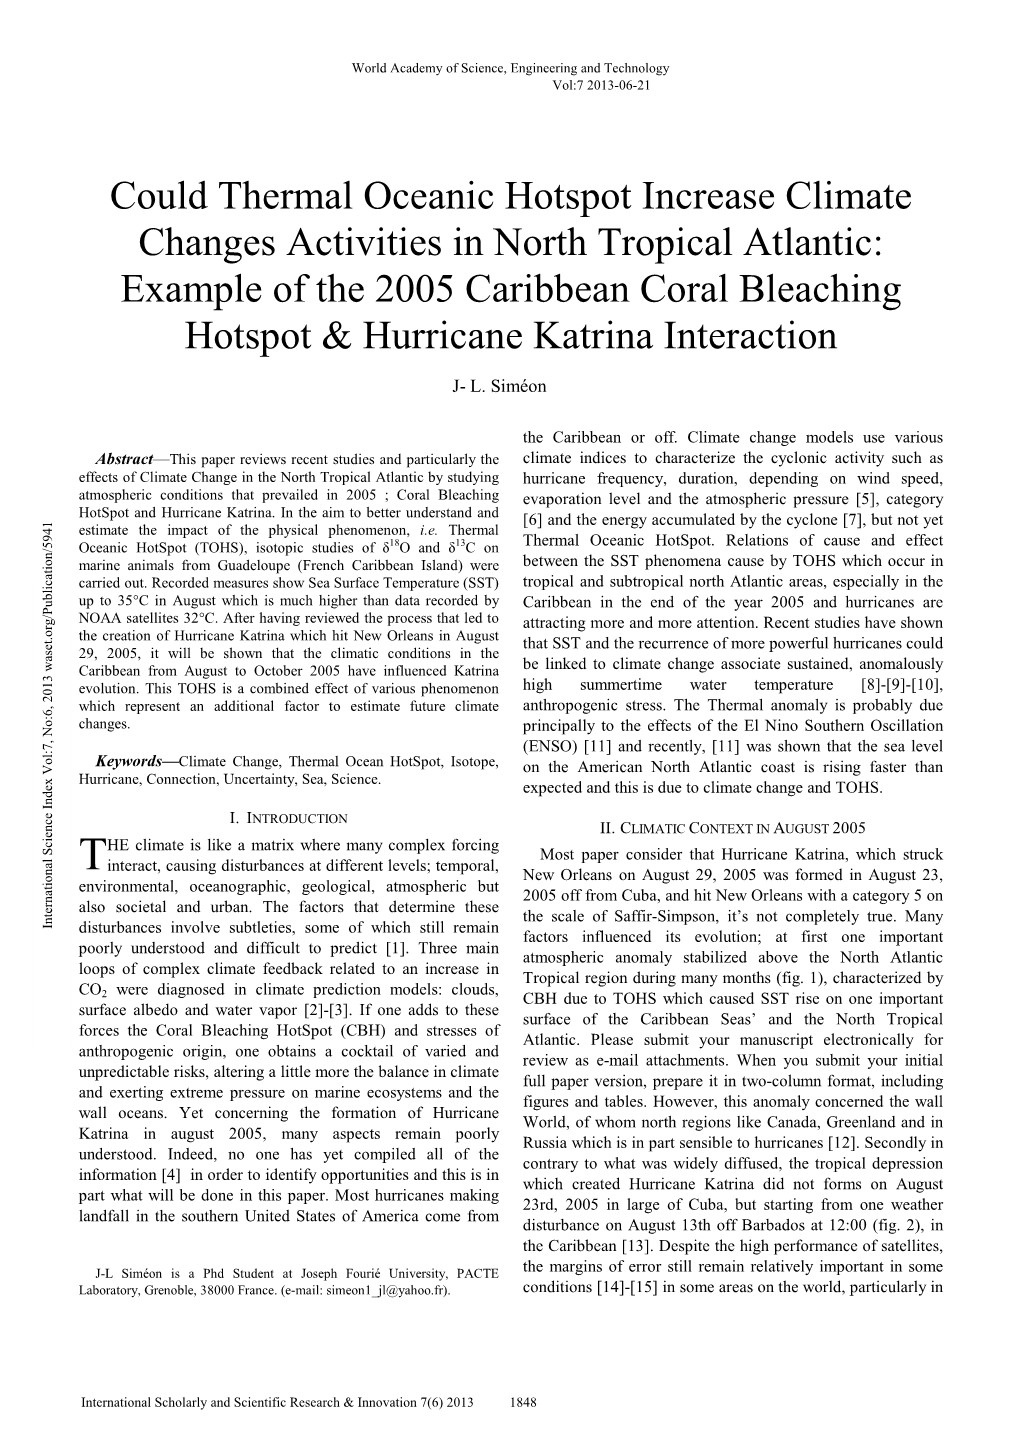 Could Thermal Oceanic Hotspot Increase Climate Changes Activities in North Tropical Atlantic: Example of the 2005 Caribbean Cora